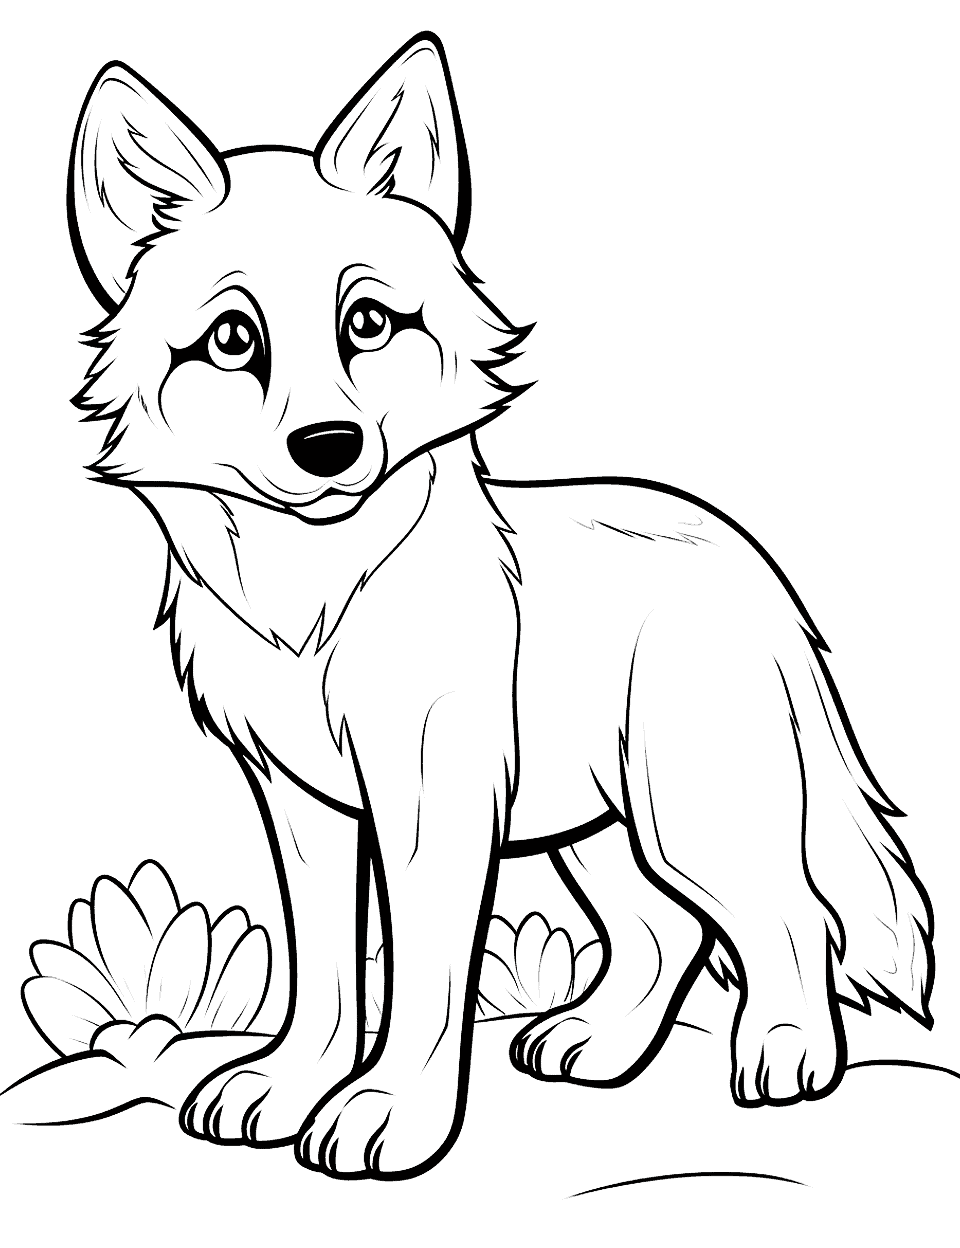 Cute Wolf Cub Coloring Page - A young wolf with cute eyes looking playfully.